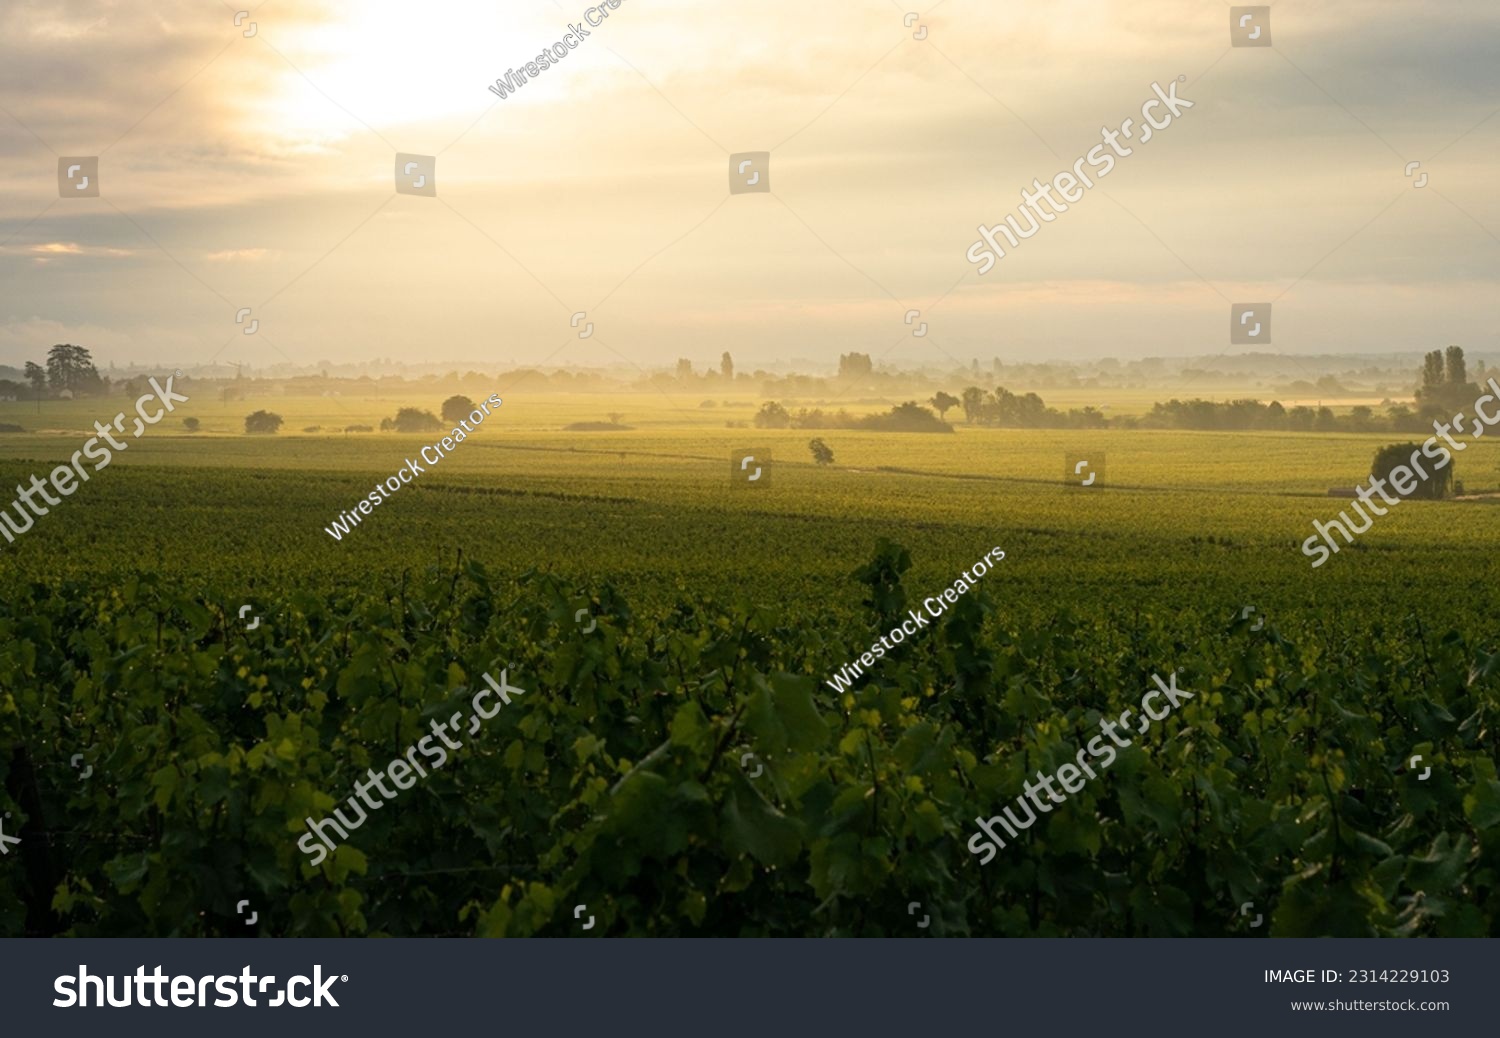 A scenic shot of green Genevrieres vineyards under the glowing sky in Meursault, Burgundy, France #2314229103